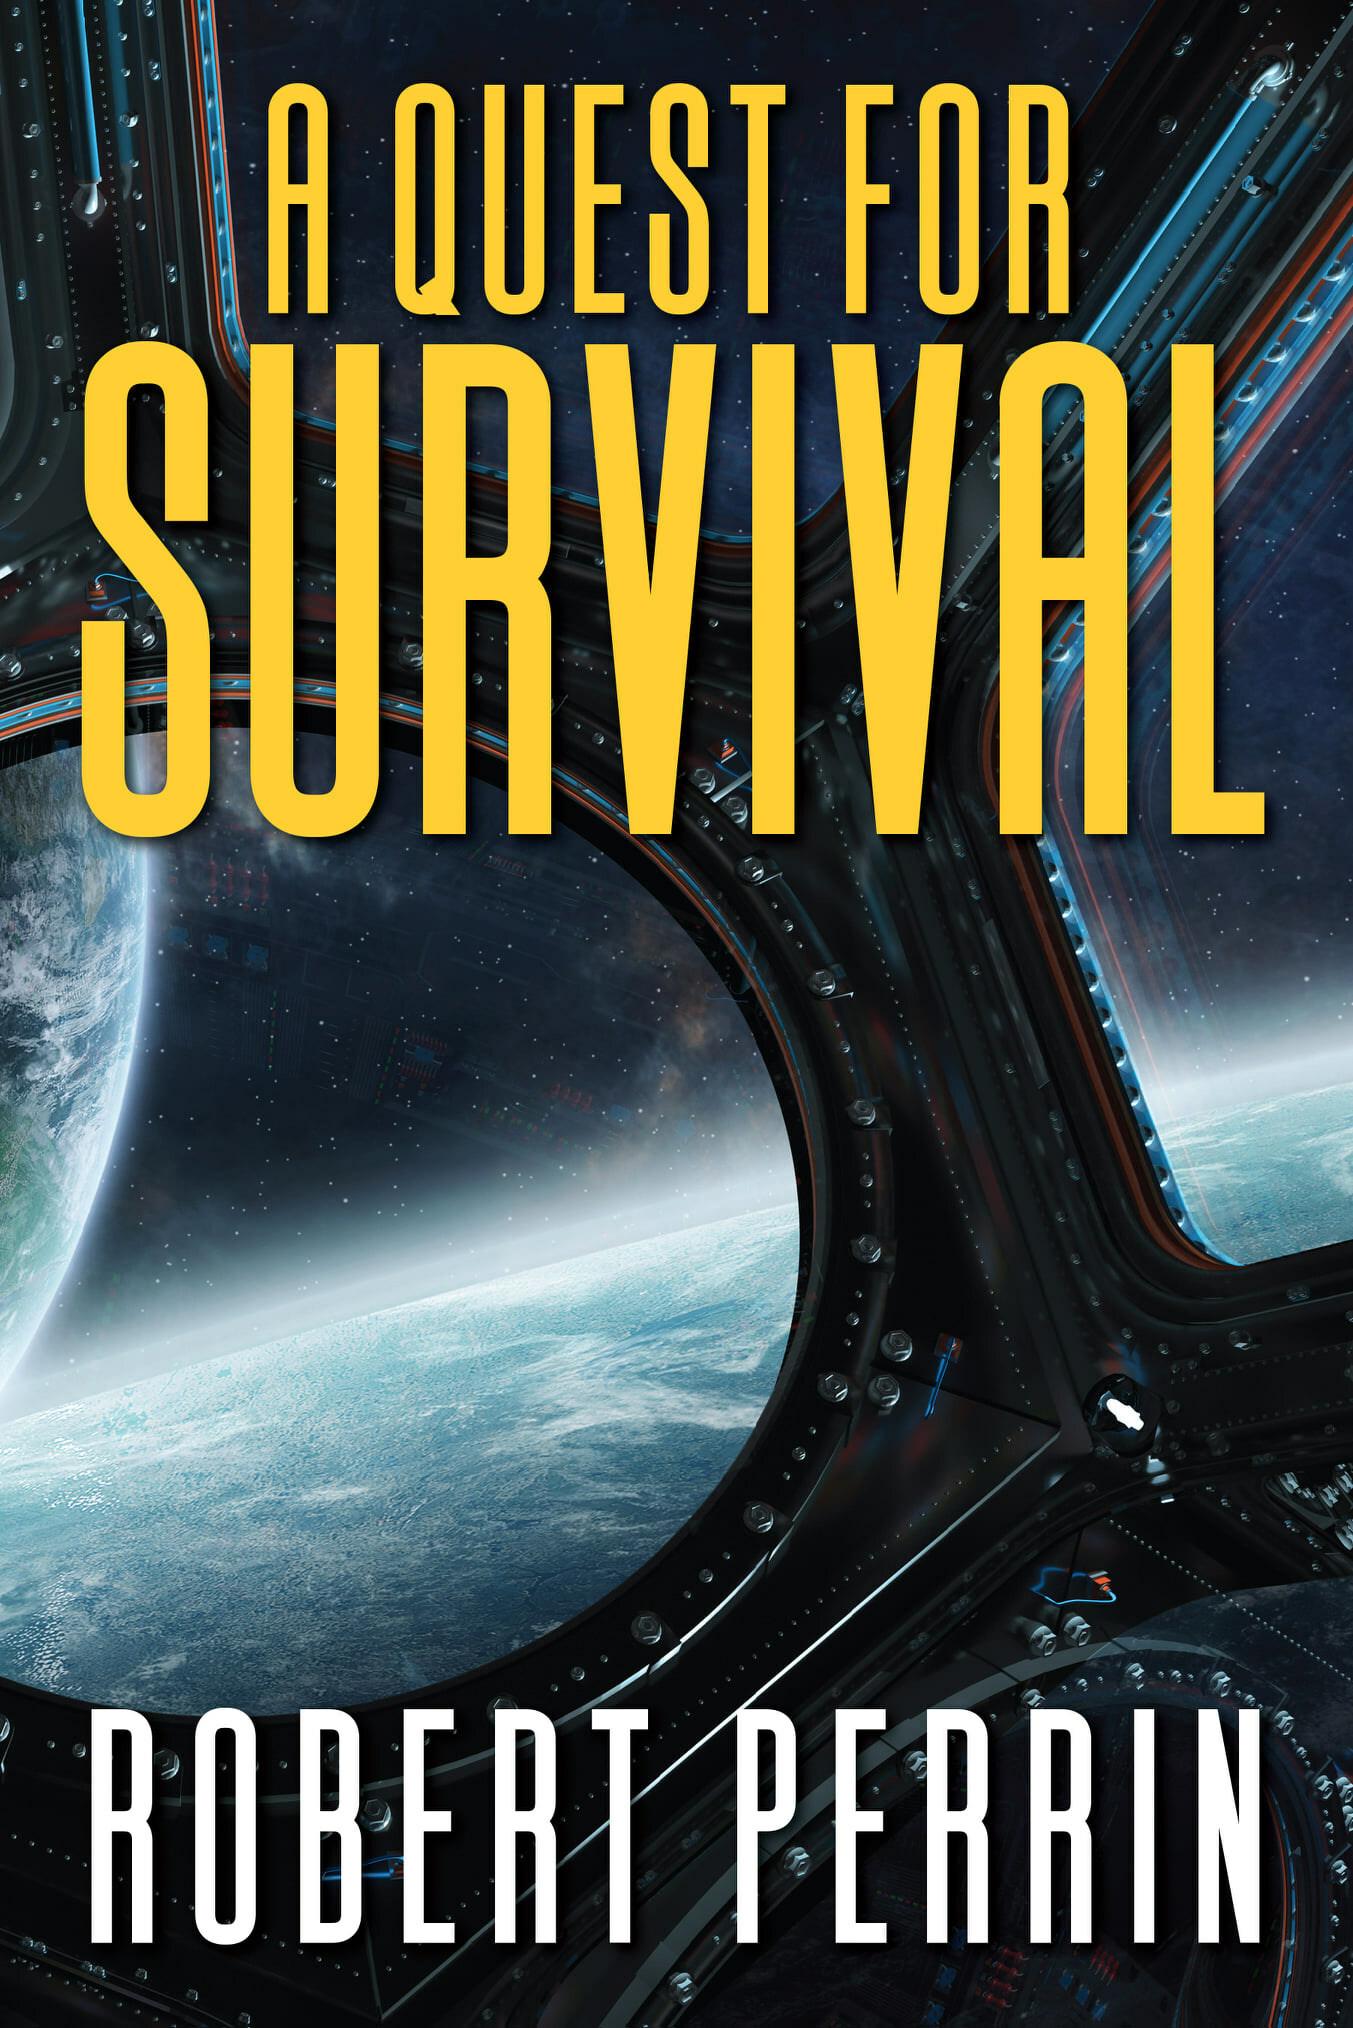 A Quest for Survival, a science fiction story, depicts the chaos that hate brings in the galaxy, which seemingly mirrors the happenings in the real world